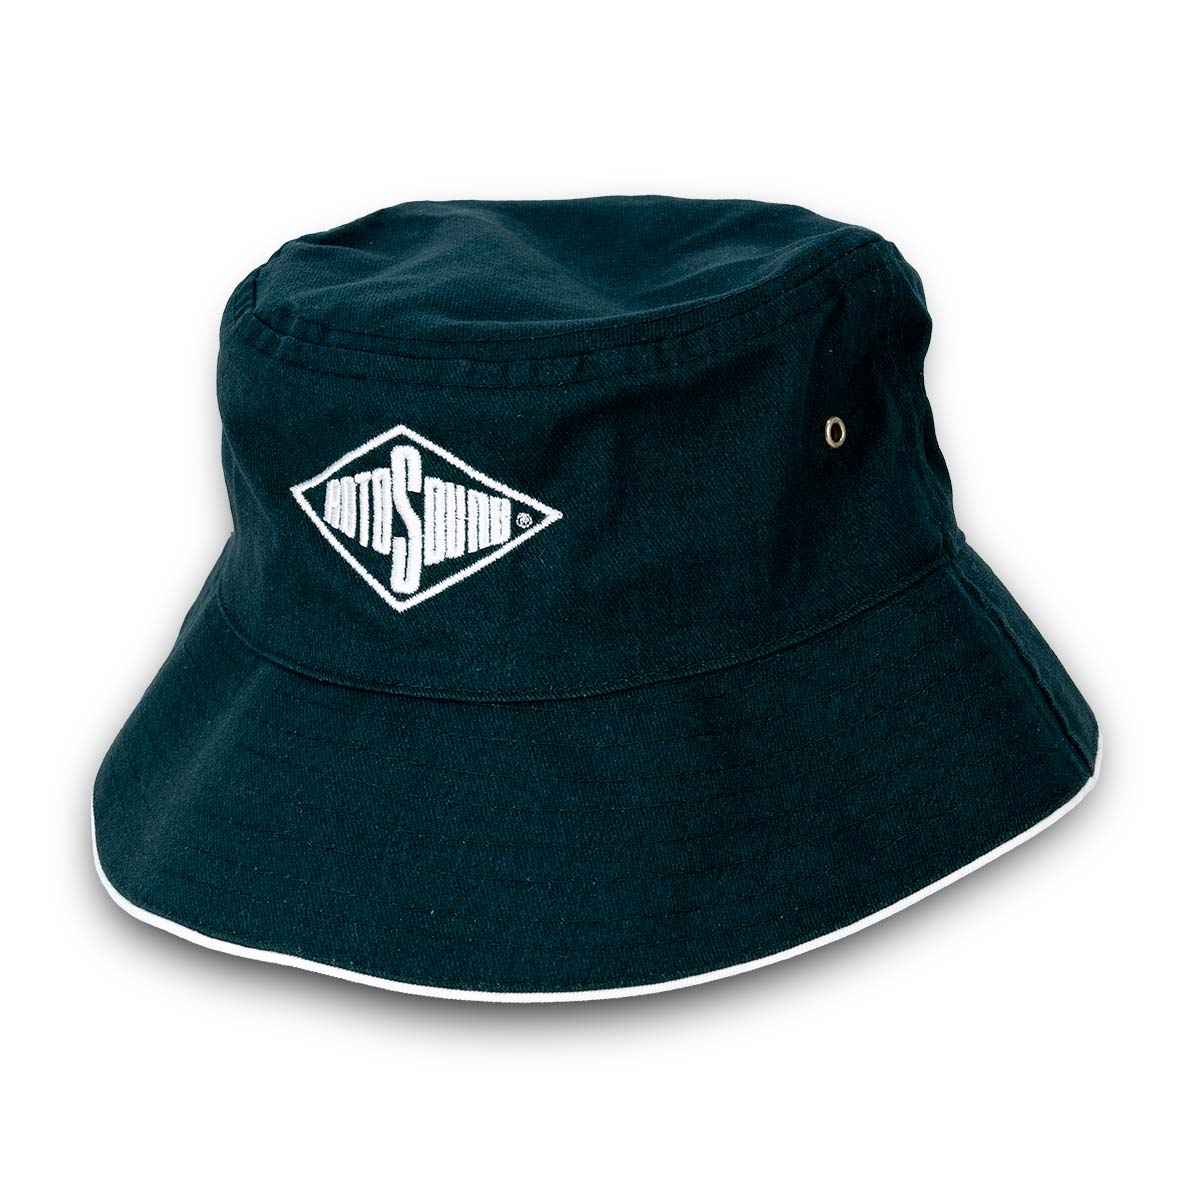 Rotosound Bucket Hat in Bottle Green • Rotosound Music Strings